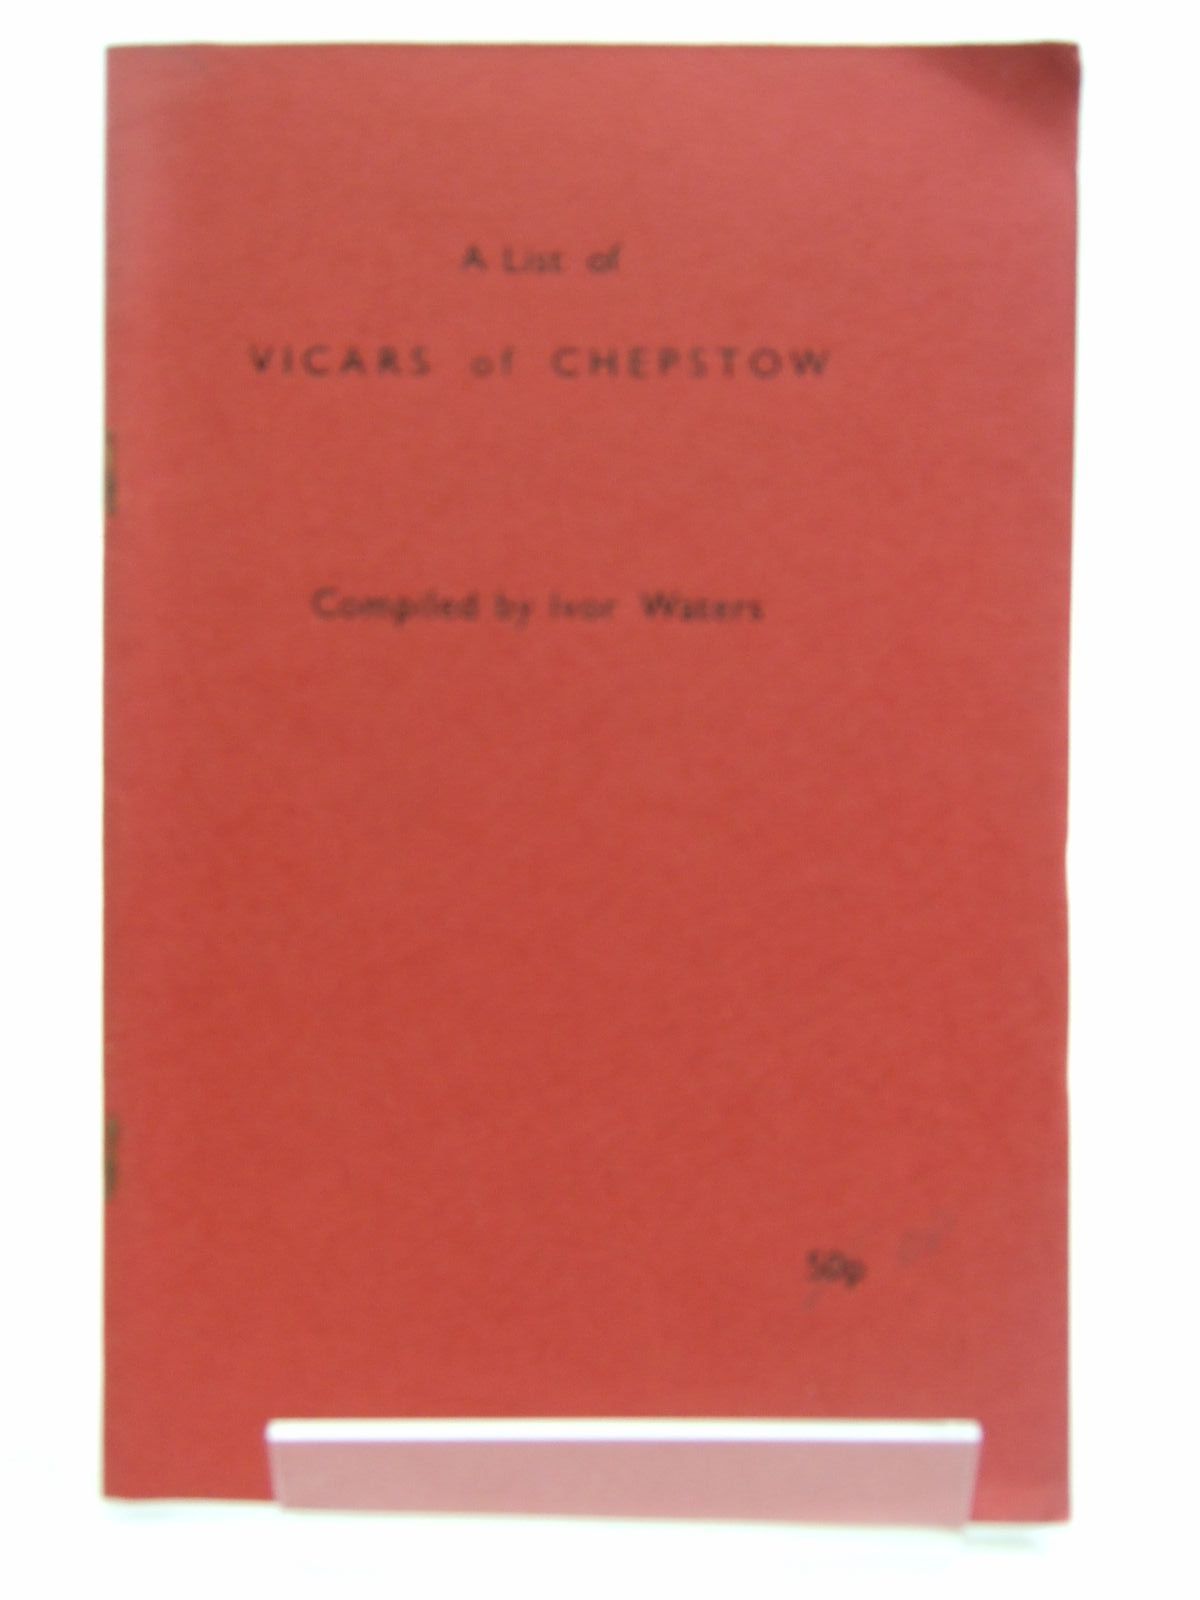 Photo of A LIST OF VICARS OF CHEPSTOW written by Waters, Ivor published by Ivor Waters (STOCK CODE: 2109387)  for sale by Stella & Rose's Books